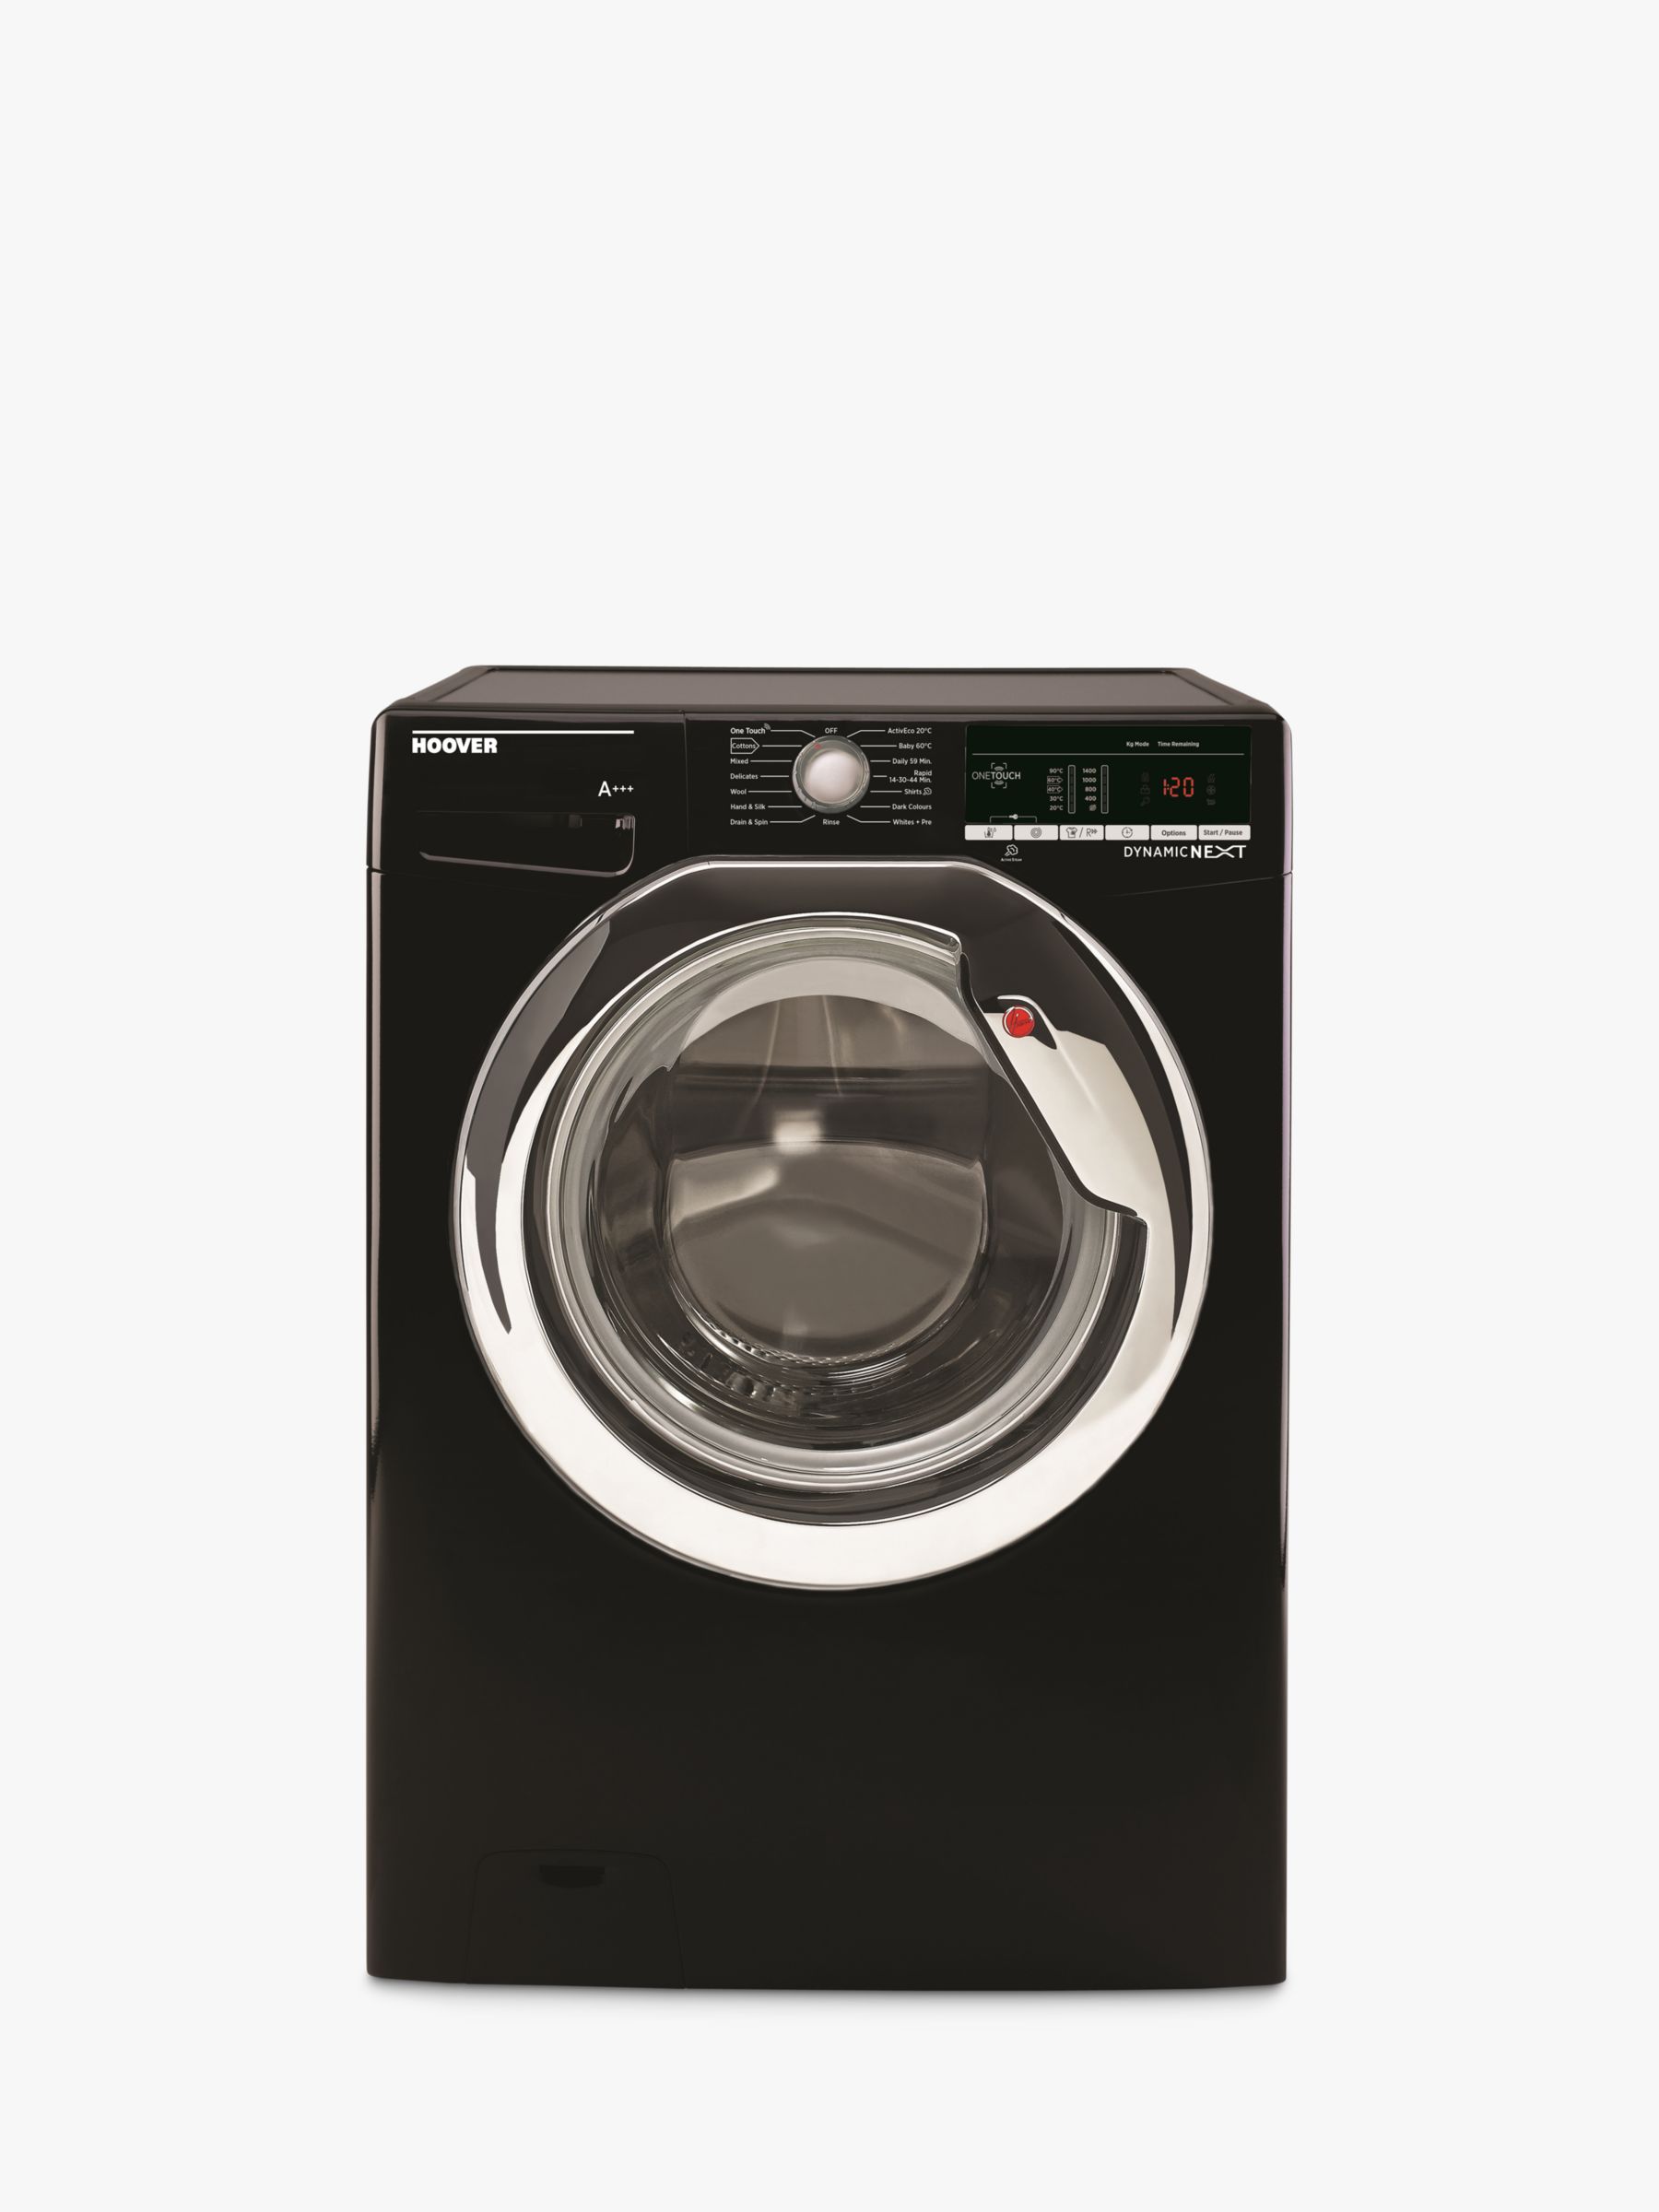 Hoover DXOA610HC3B Freestanding Washing Machine, 10kg Load, A+++ Energy Rating, 1600rpm Spin, Black with Chrome Door